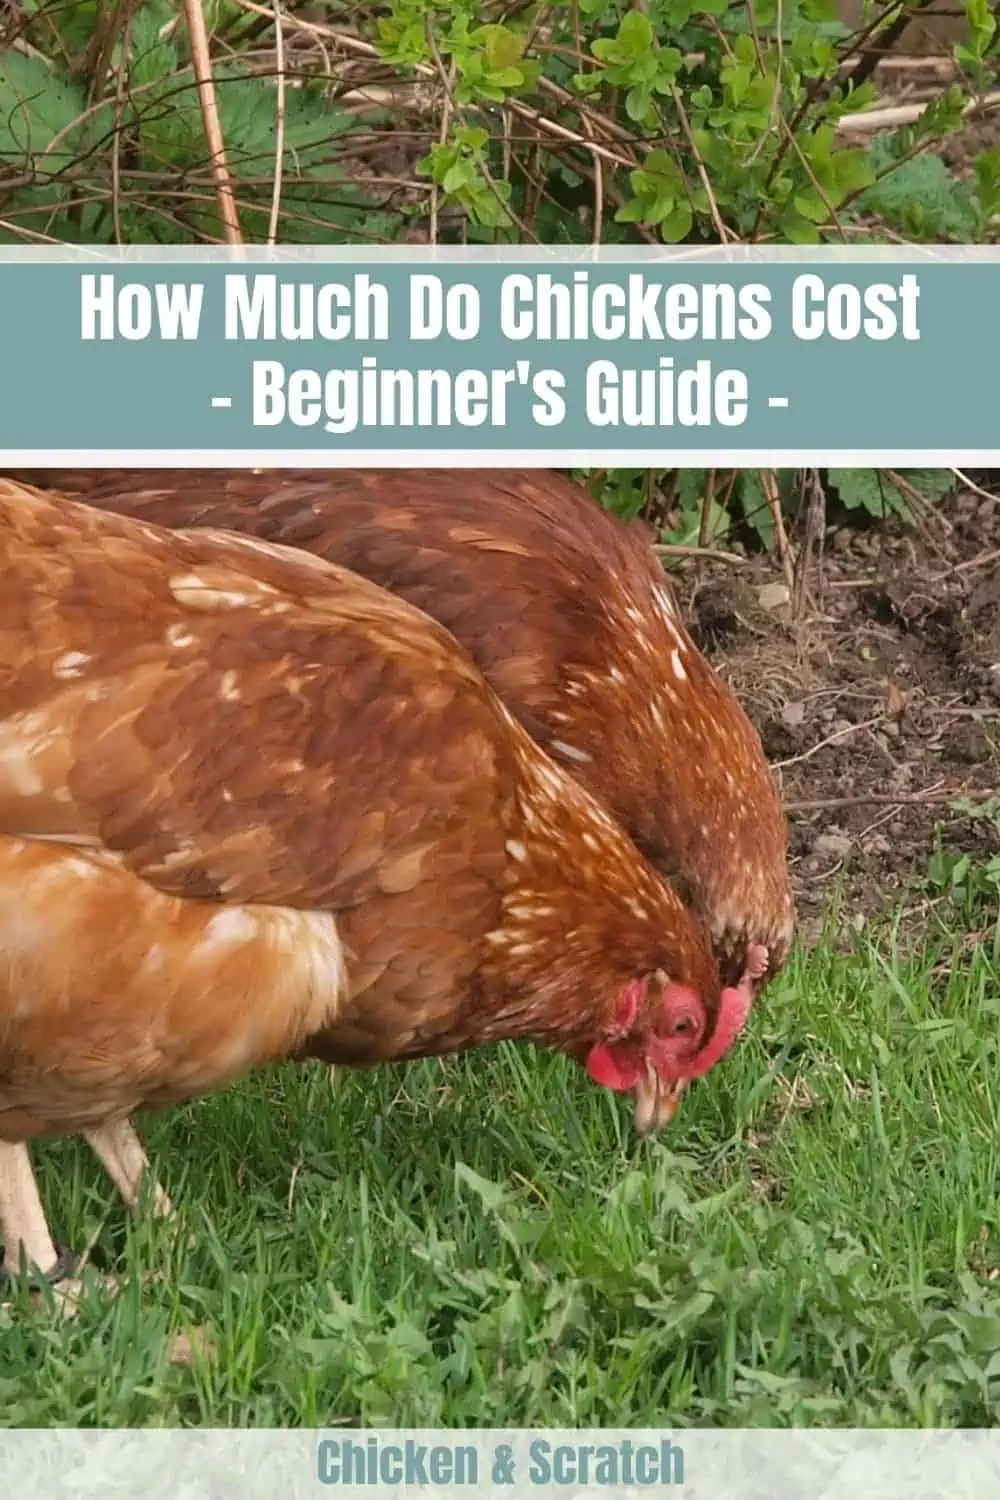 How Much Do Chickens Cost